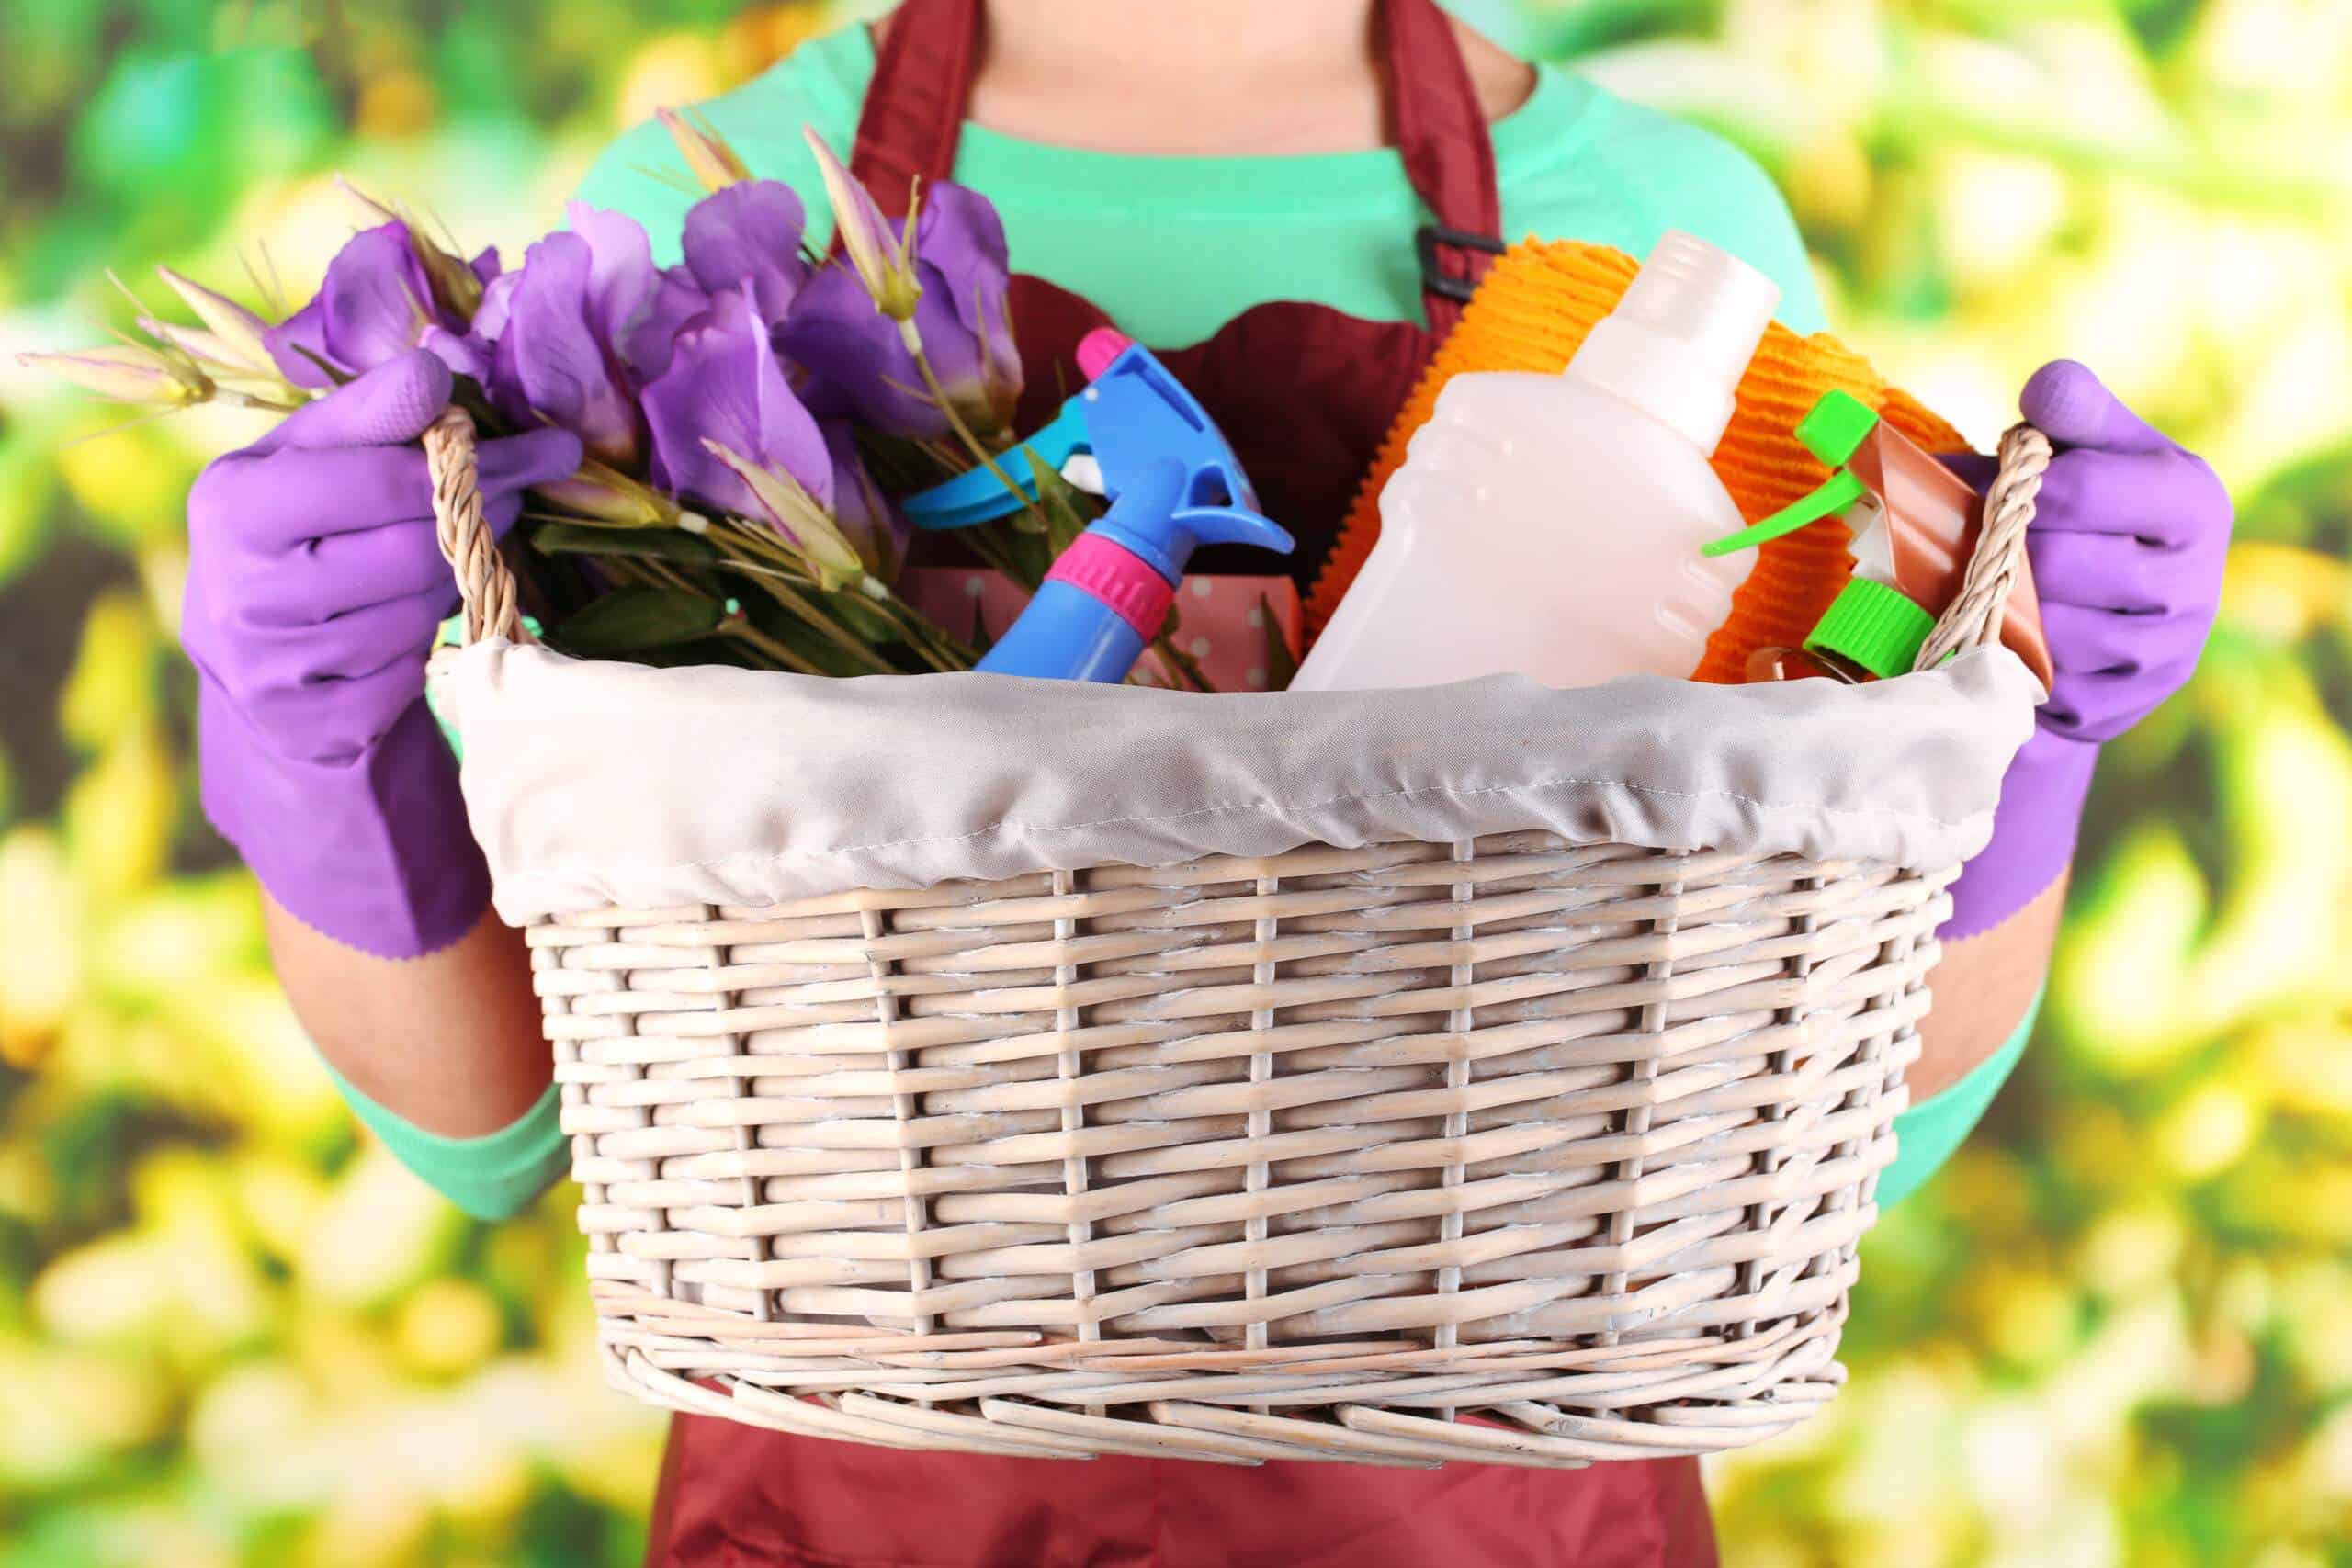 Spring cleaning tips to make the task achievable